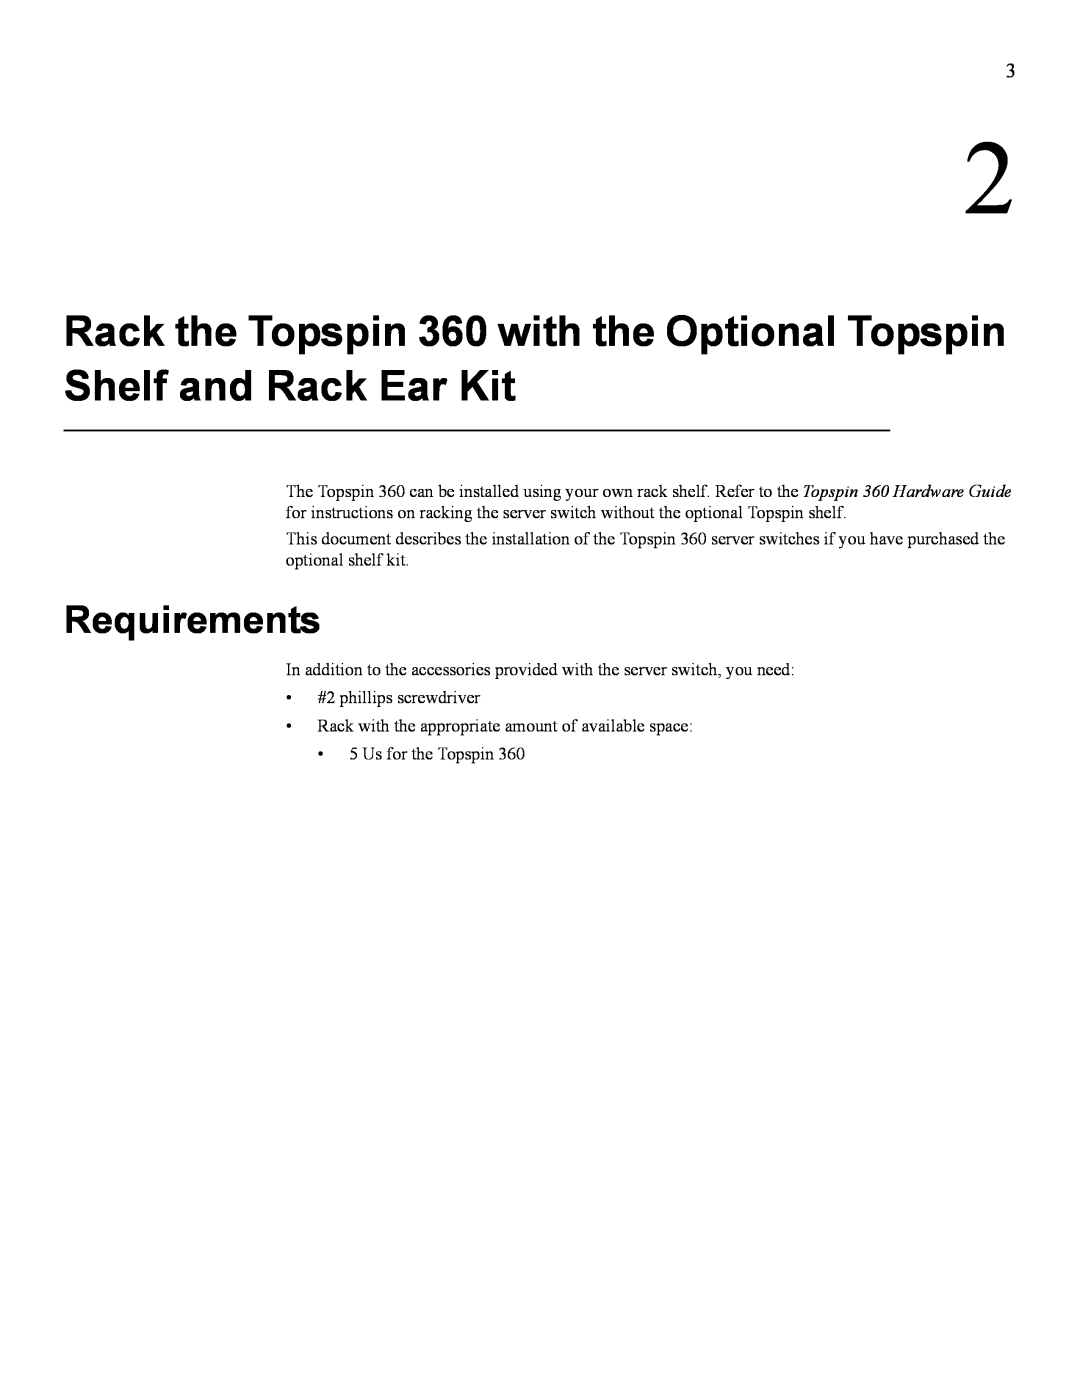 Cisco Systems manual Rack the Topspin 360 with the Optional Topspin Shelf and Rack Ear Kit, Requirements 